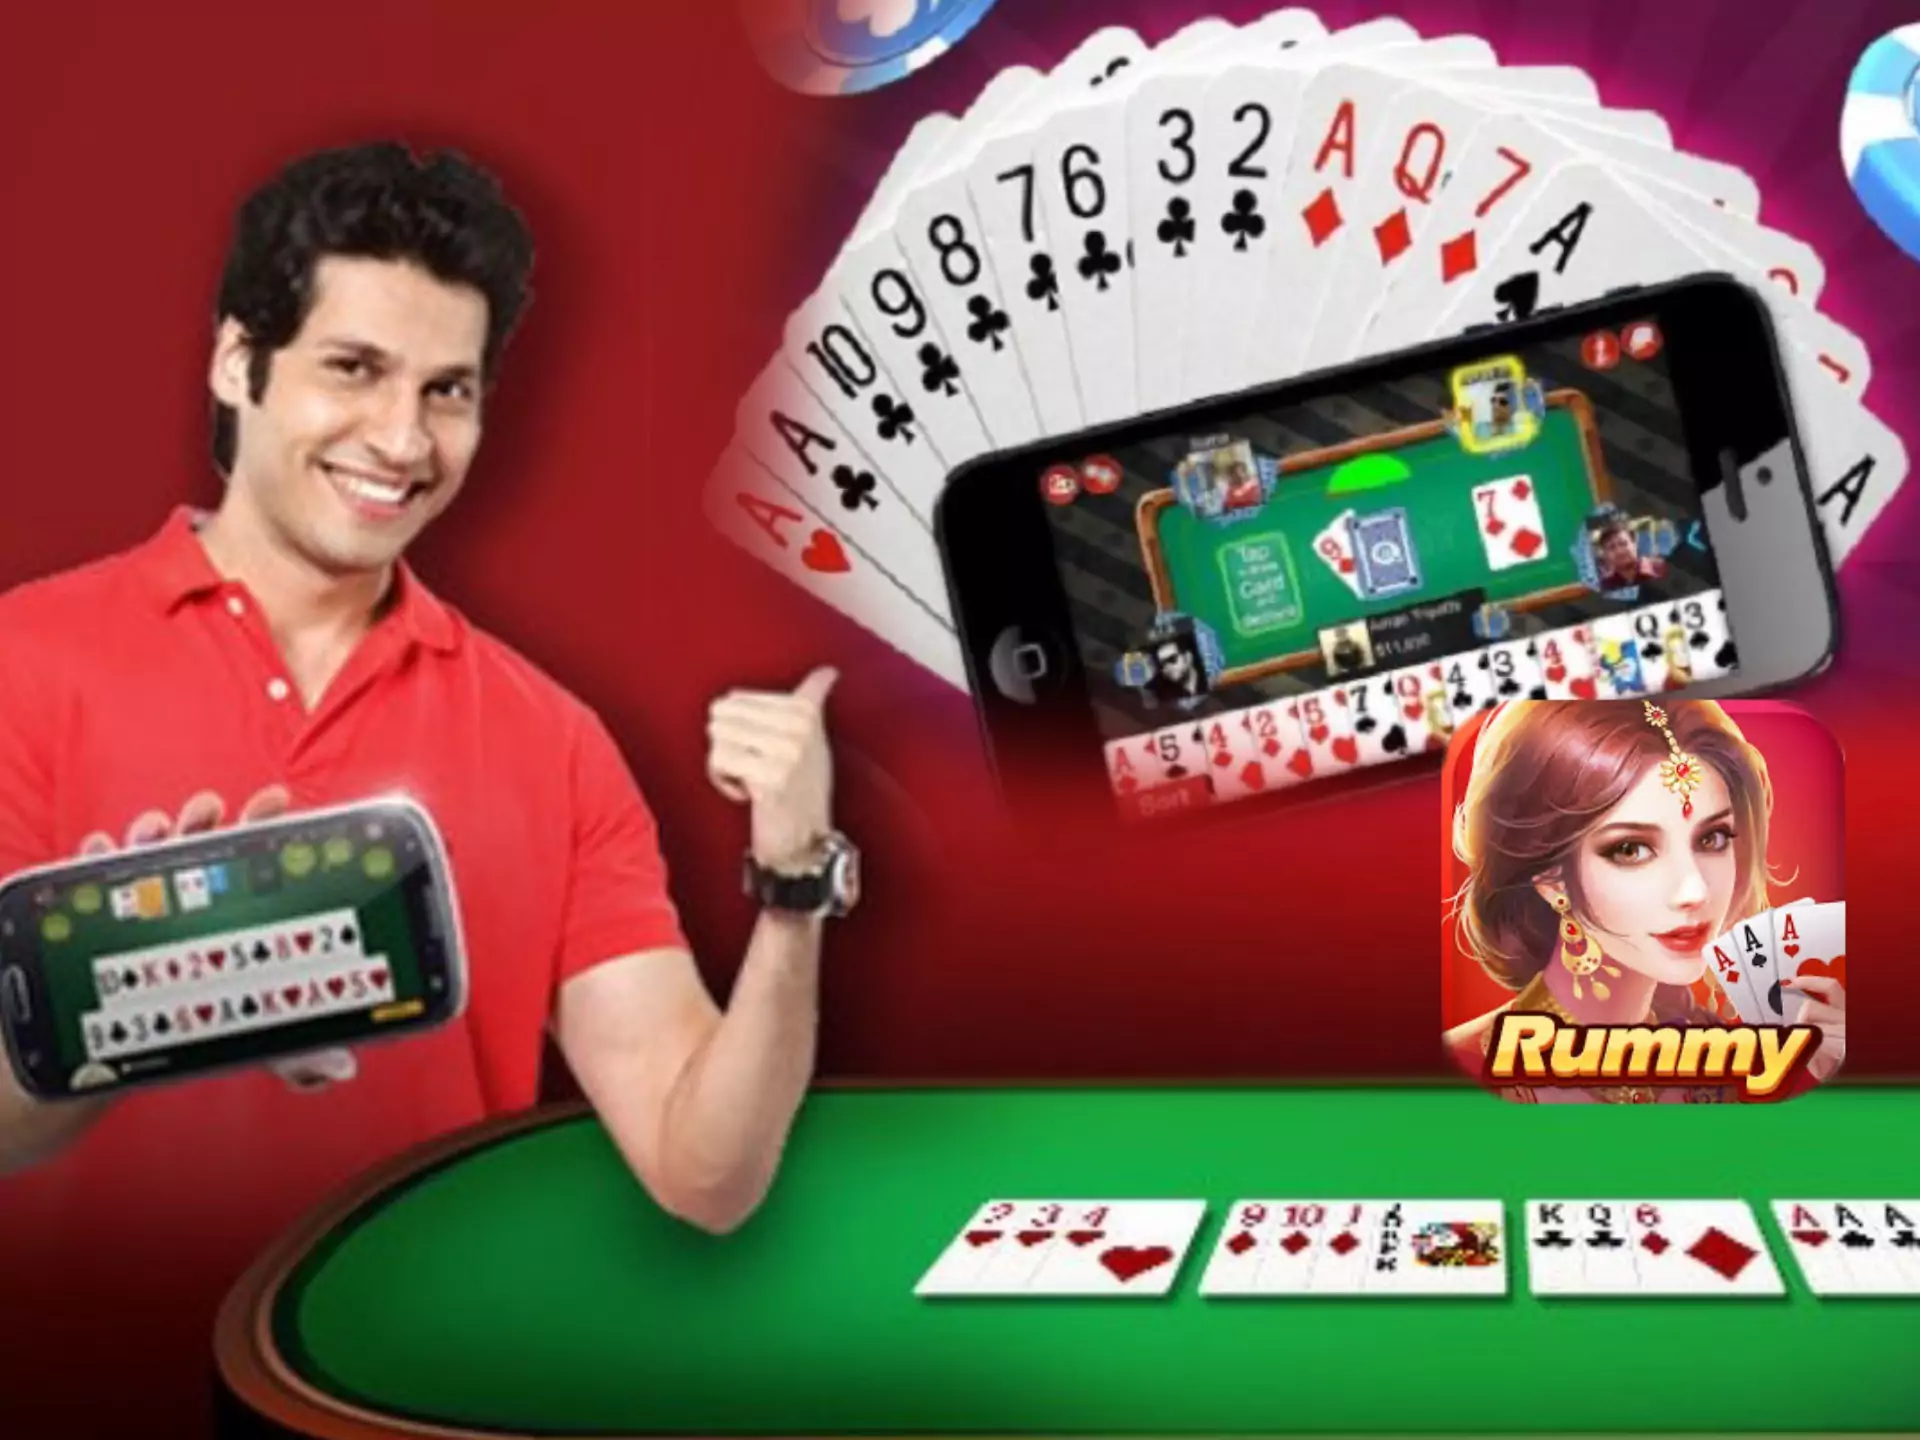 Learn how to play rummy online with a s